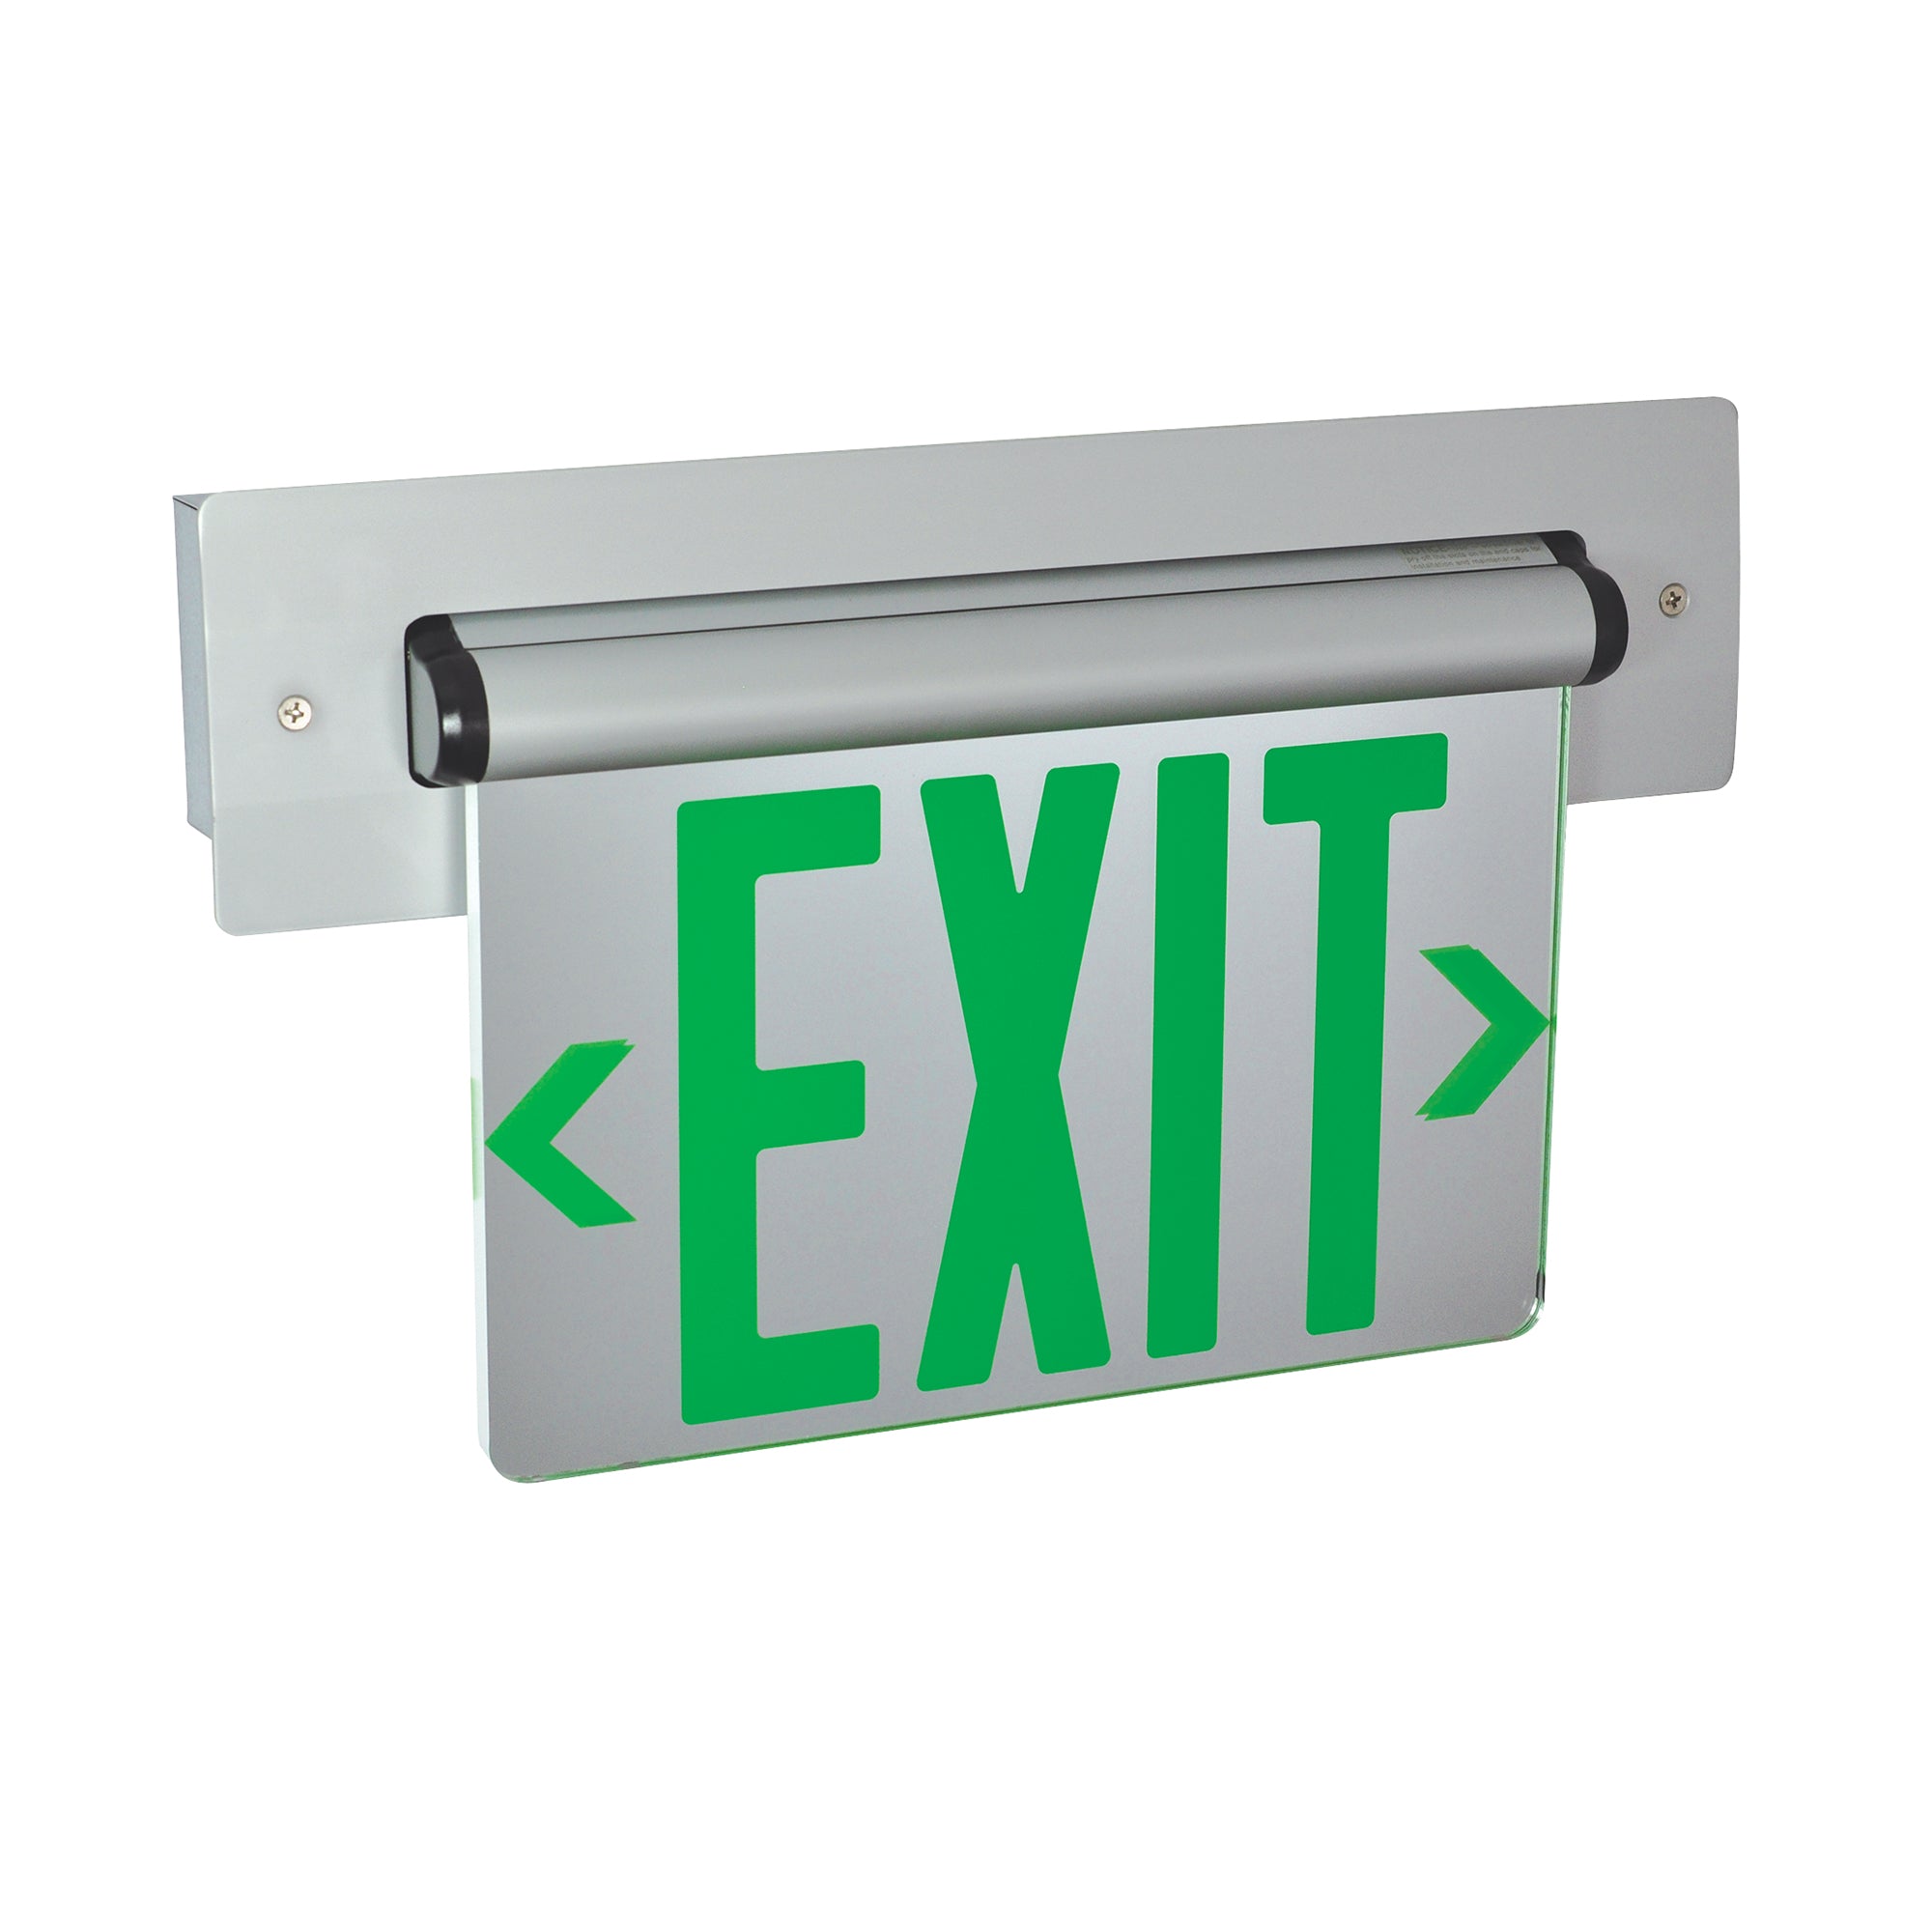 Nora Lighting NX-815-LEDGMA - Exit / Emergency - Recessed Adjustable LED Edge-Lit Exit Sign, Battery Backup, 6 Inch Green Letters, Single Face / Mirrored Acrylic, Aluminum Housing